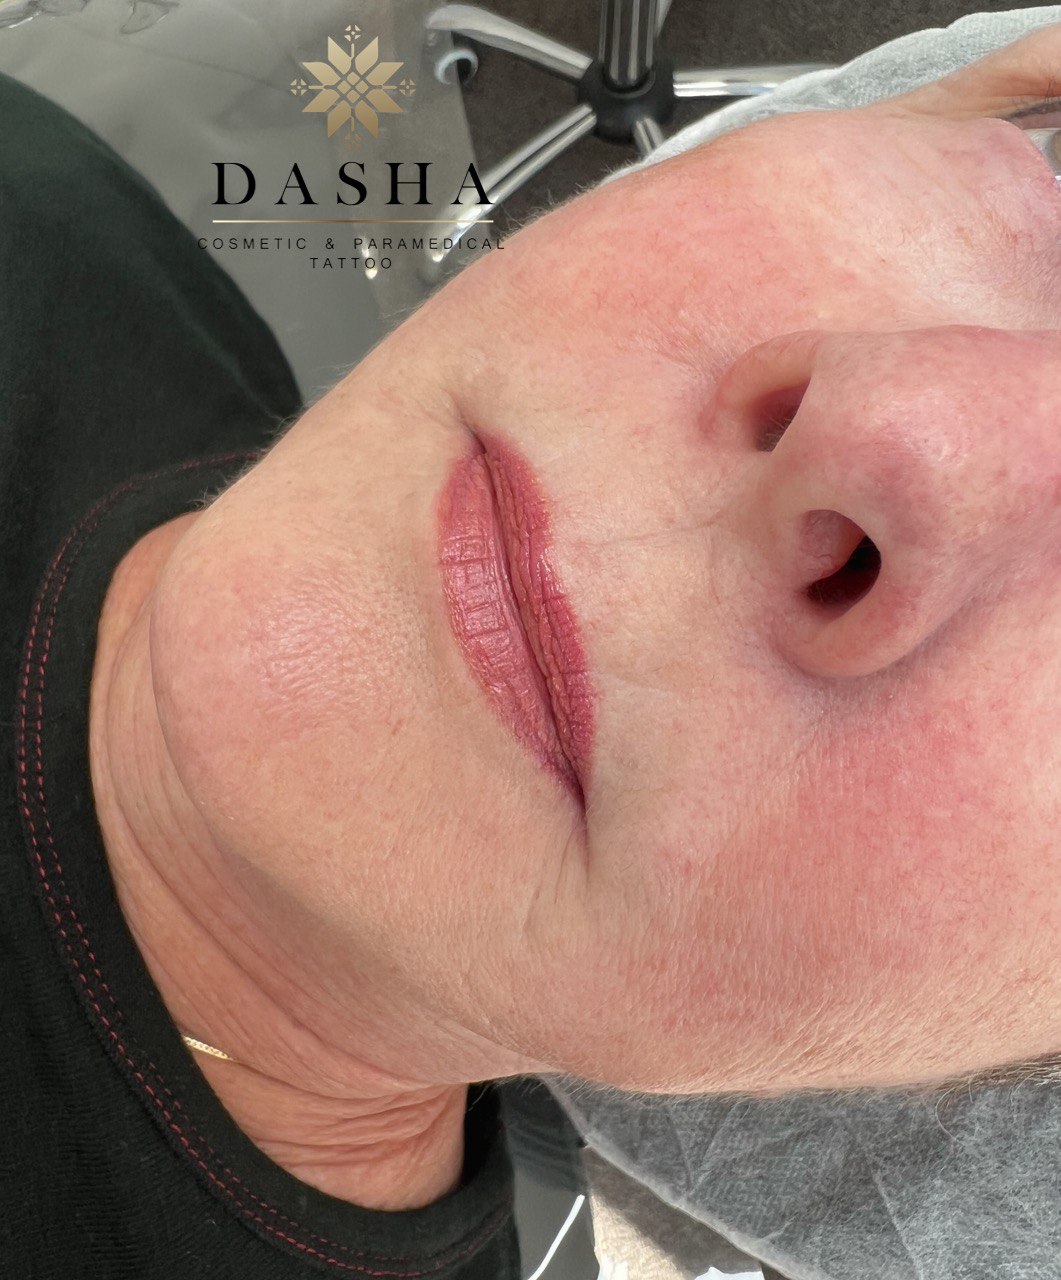 Lipstick Cosmetic Tattoo. Cosmetic and Mediical Tattoo by Dasha. Permanent makeup and reconstructive tattoo, scalp micro-pigmentation in Christchurch, New Zealand